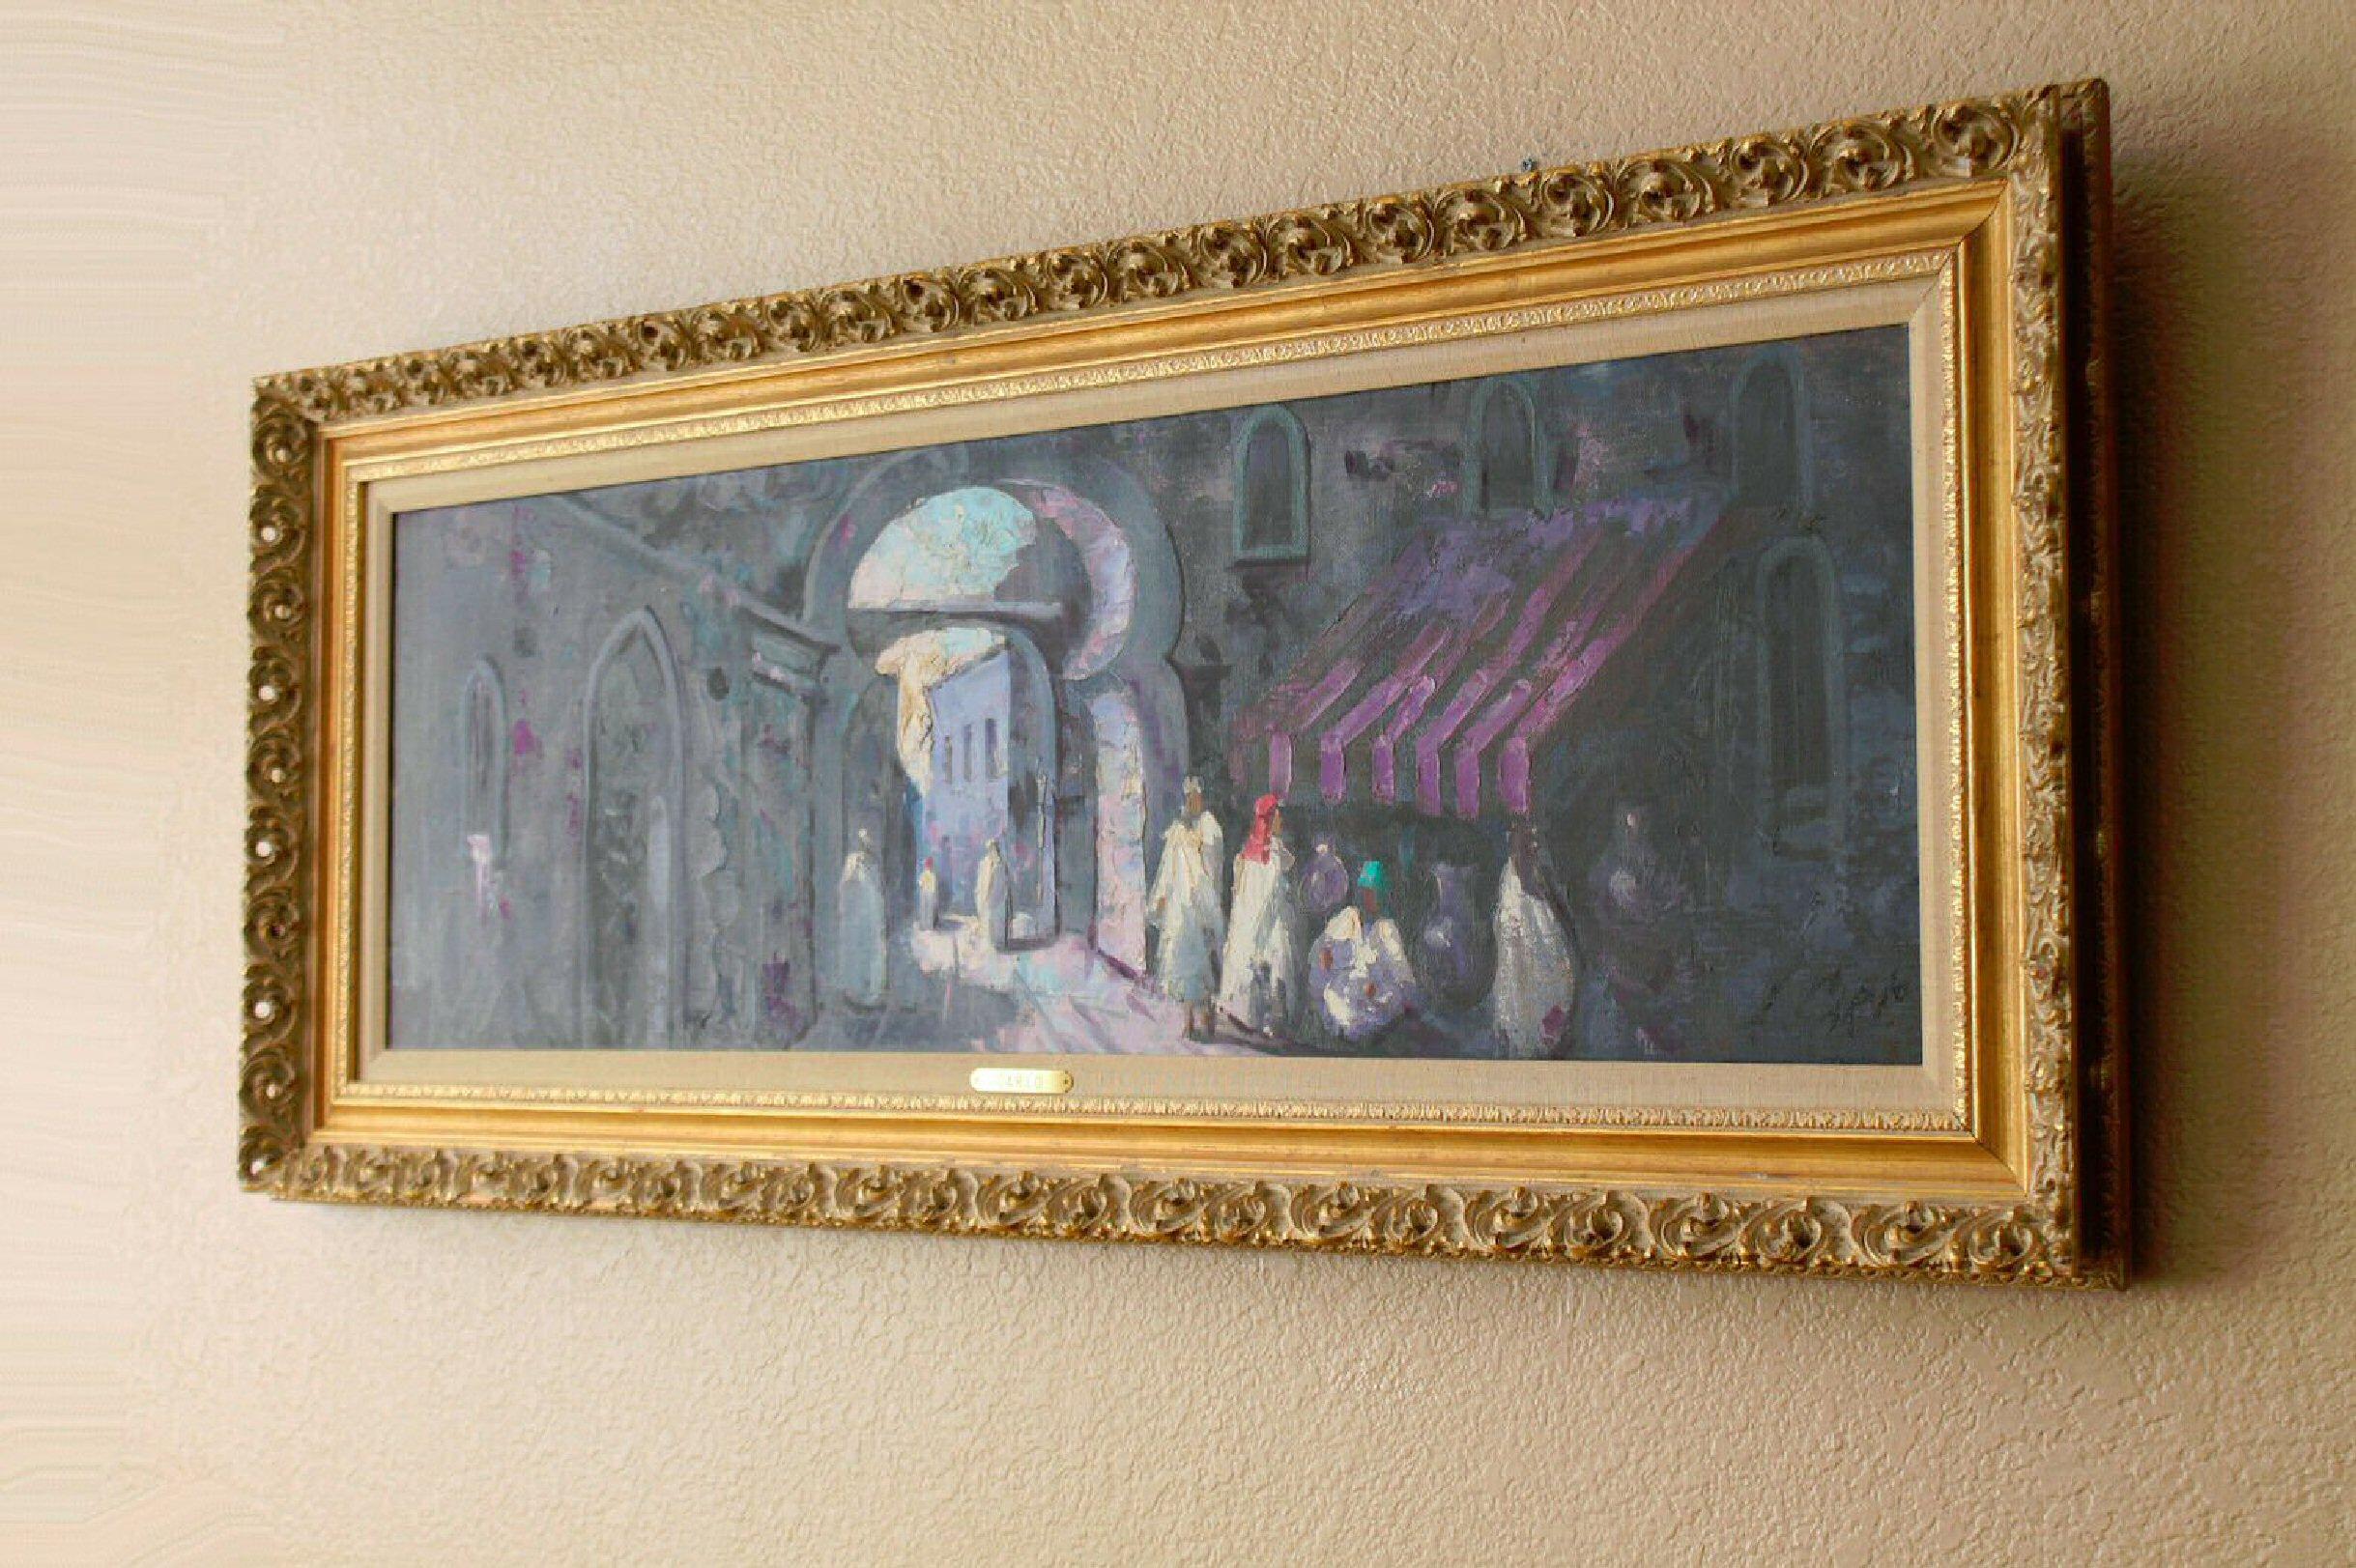 MONUMENTAL!

ORIGINAL OIL PAINTING
CARLO OF HOLLYWOOD
ARAB MARKET

DIMENSIONS:
( LARGE  Approx 53